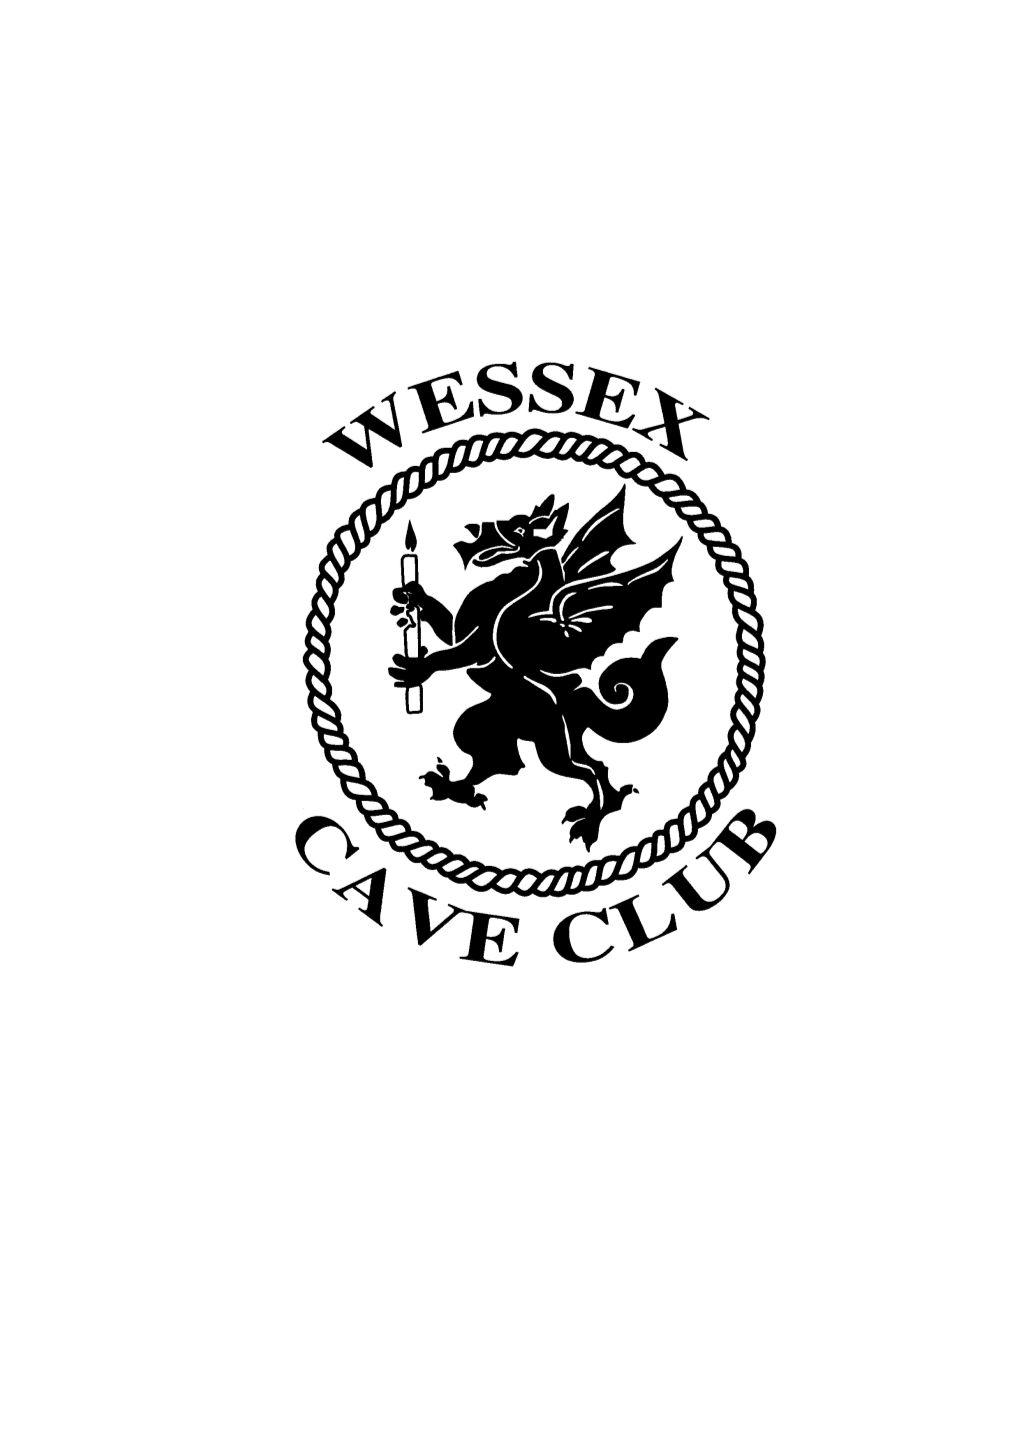 The Wessex Cave Club Journal Volume 24 Number 261 August 1998